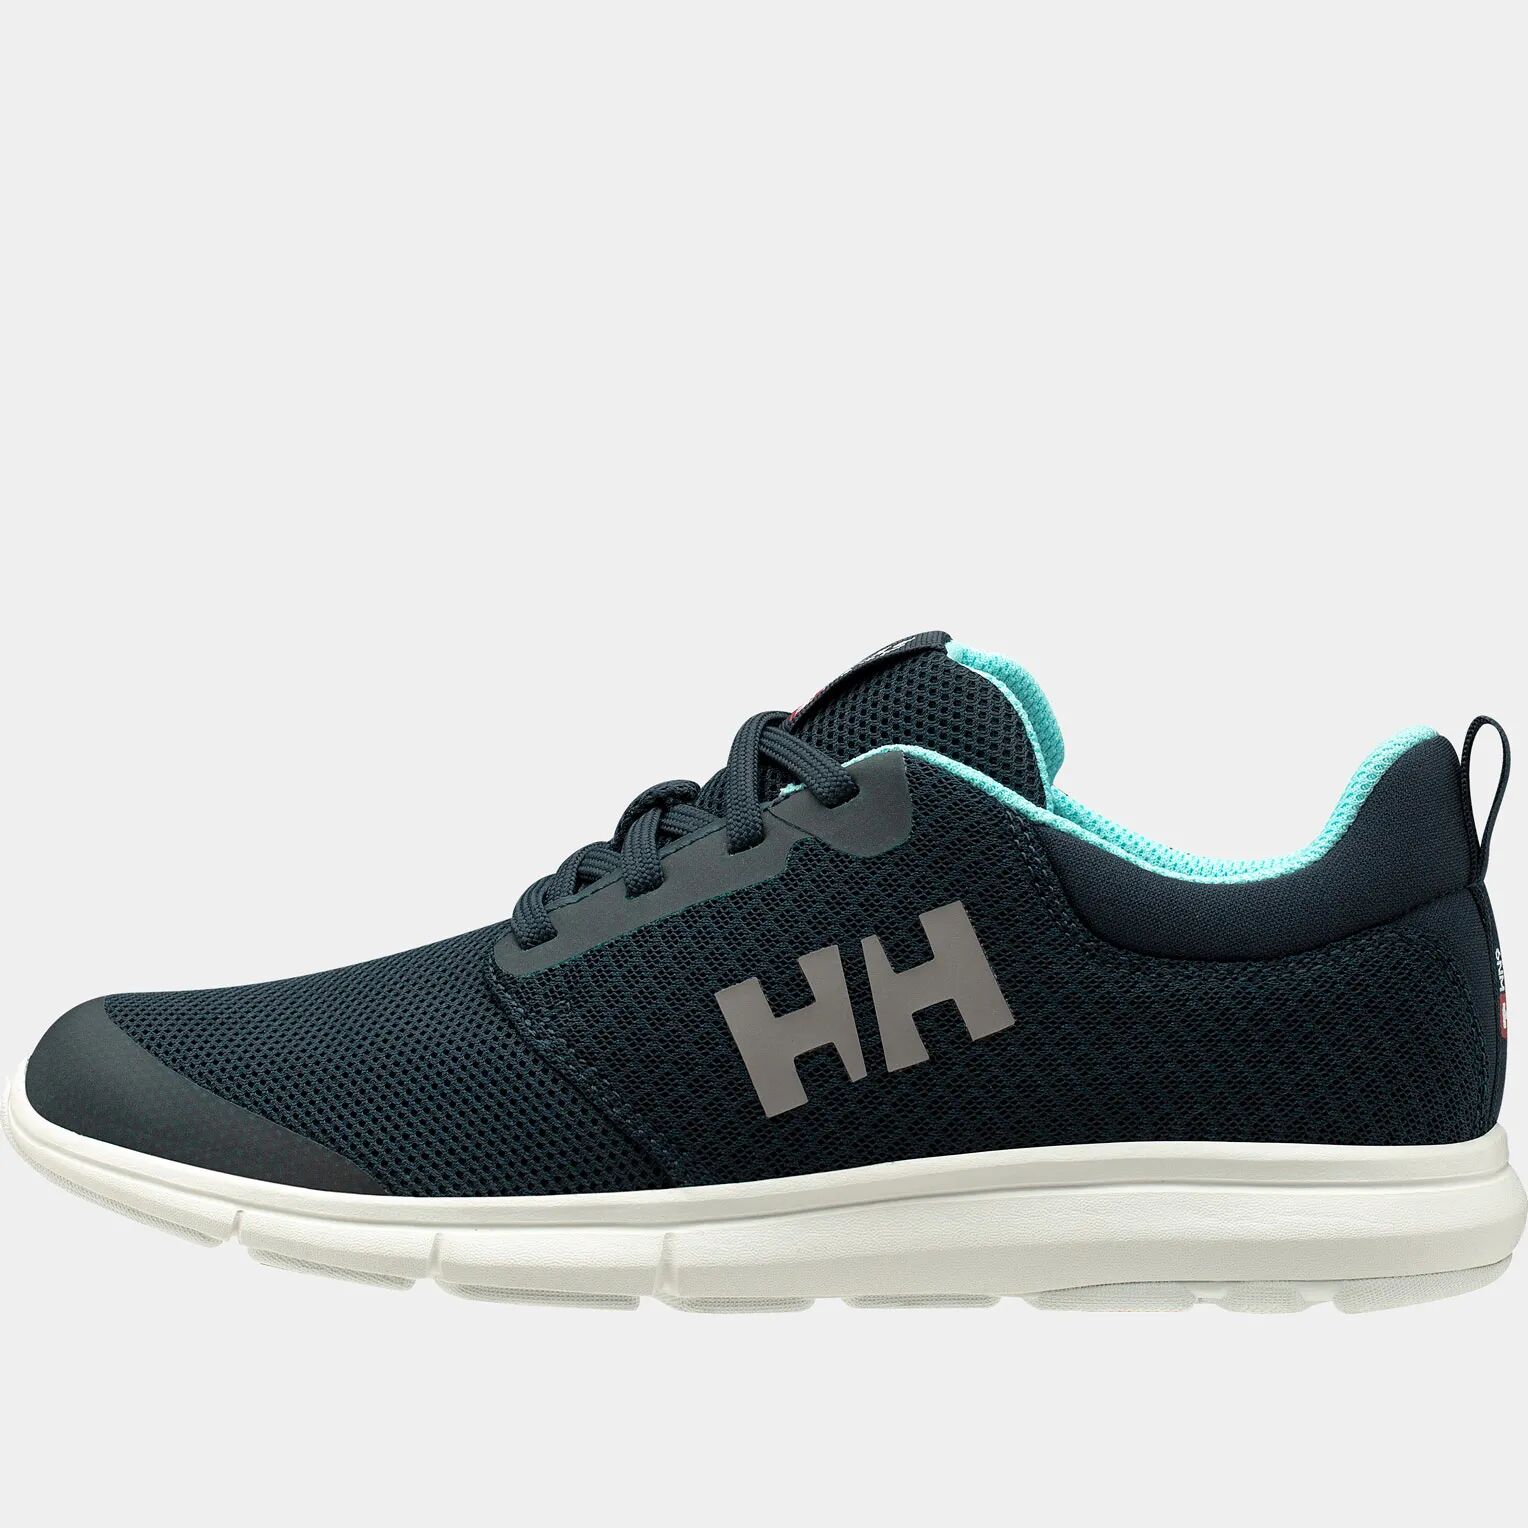 Helly Hansen Women's Feathering Light Training Shoes Navy 8